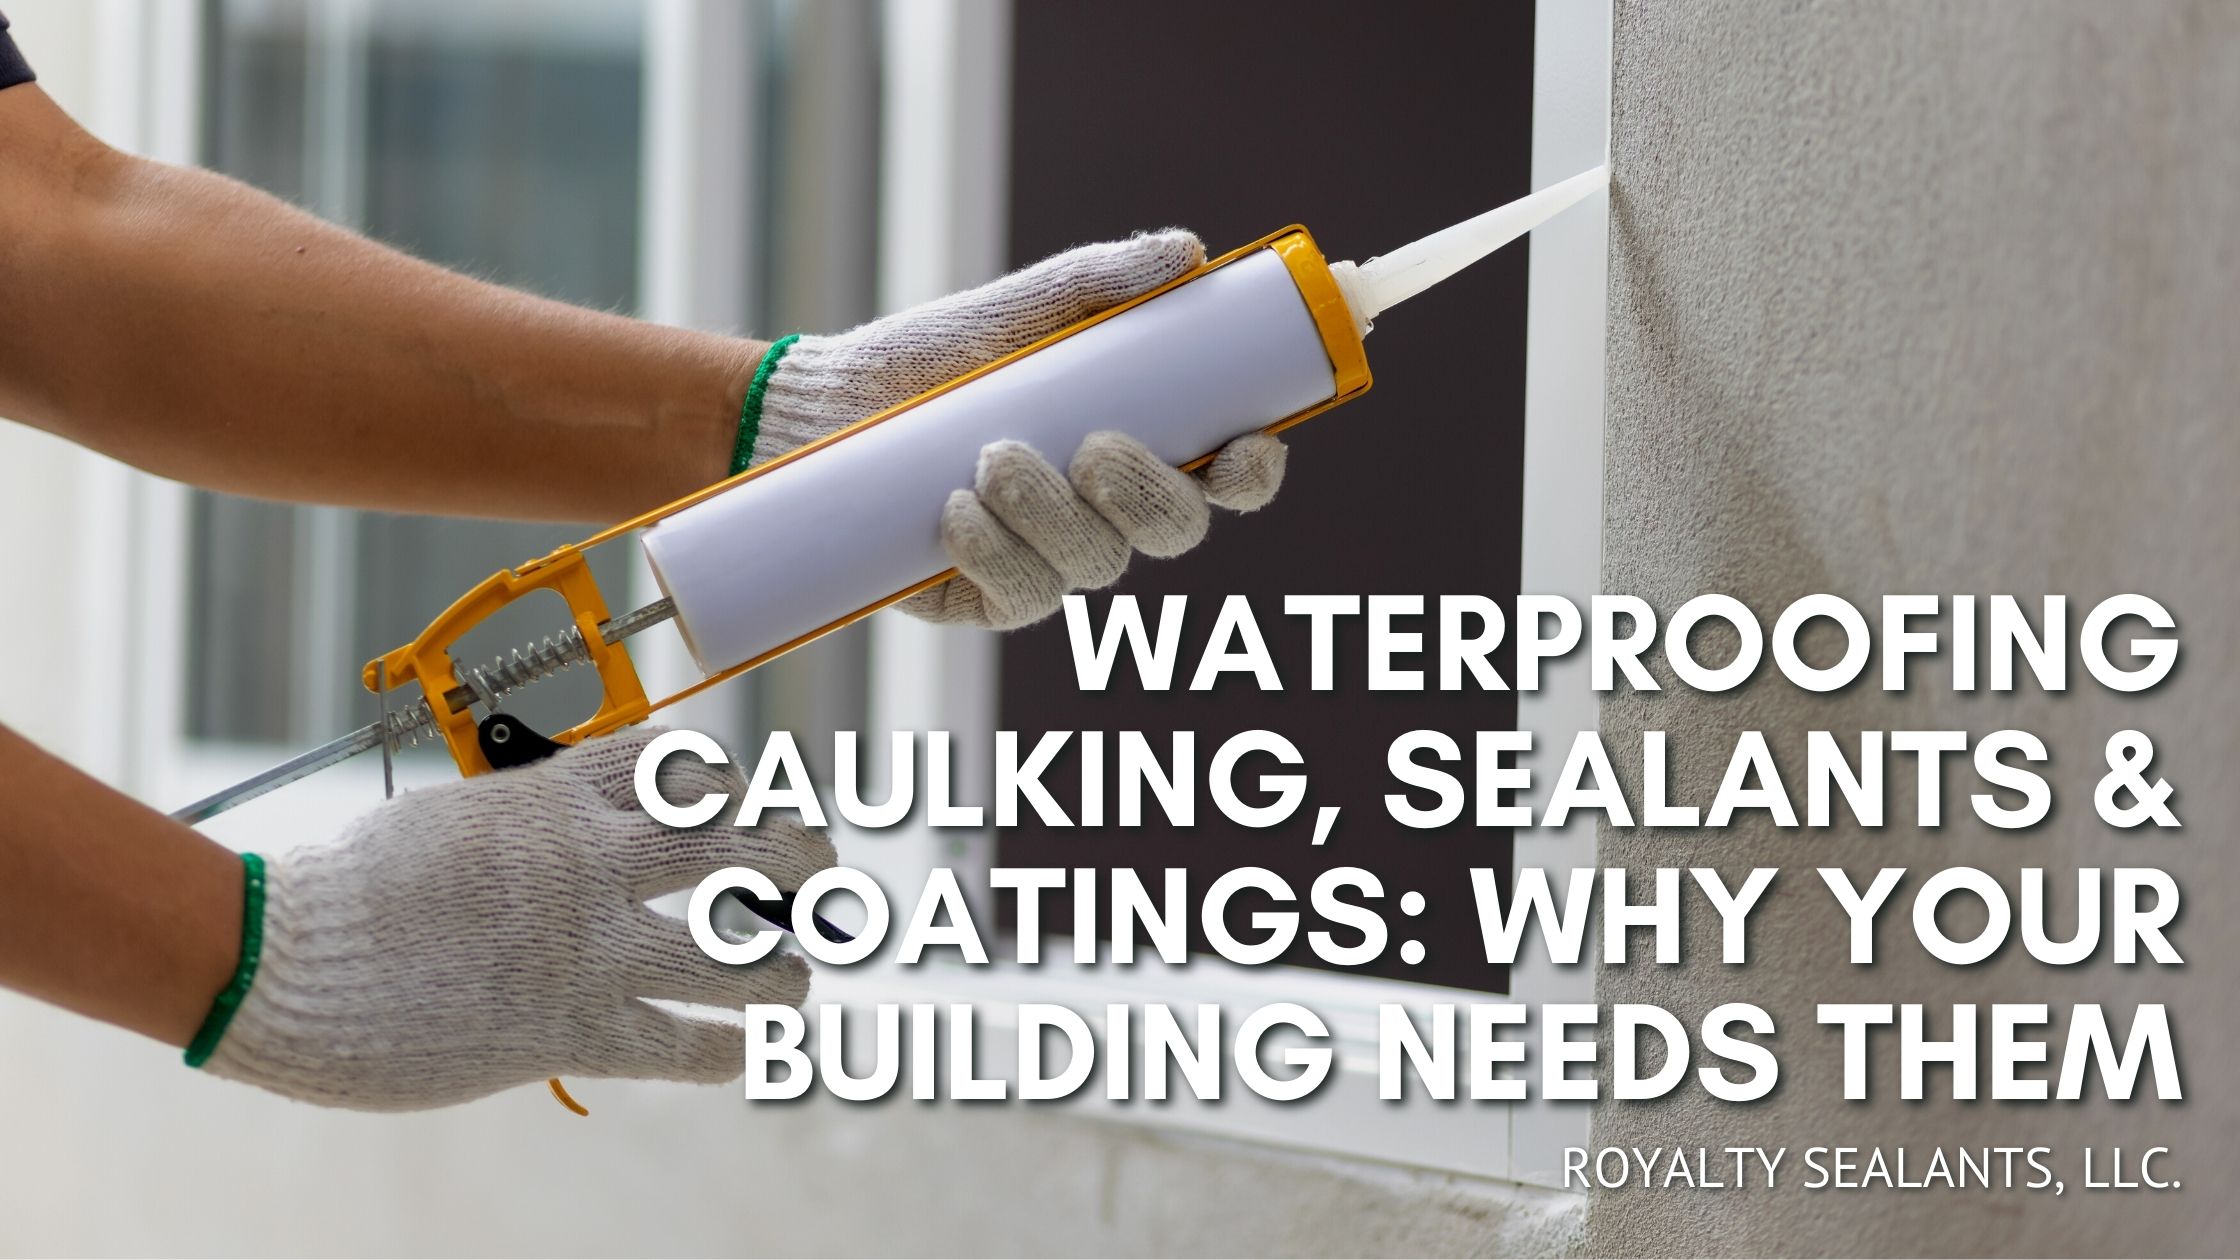 Waterproofing Caulking, Sealants & Coatings: Why Your Building Needs Them